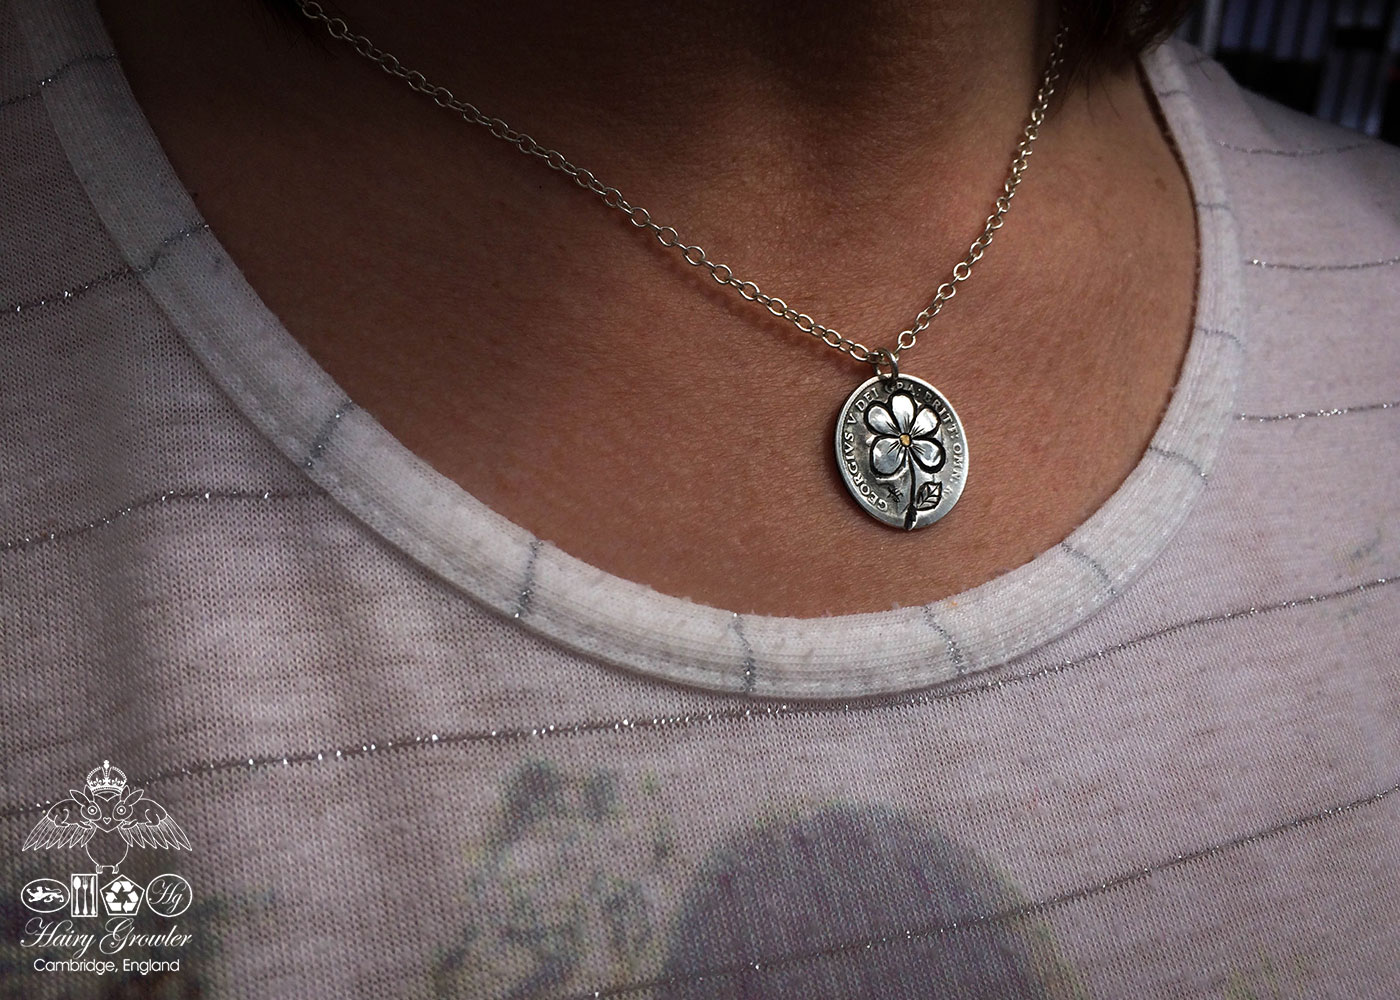 Handmade and repurposed lucky silver sixpence 'Forget me not' coin necklace pendant